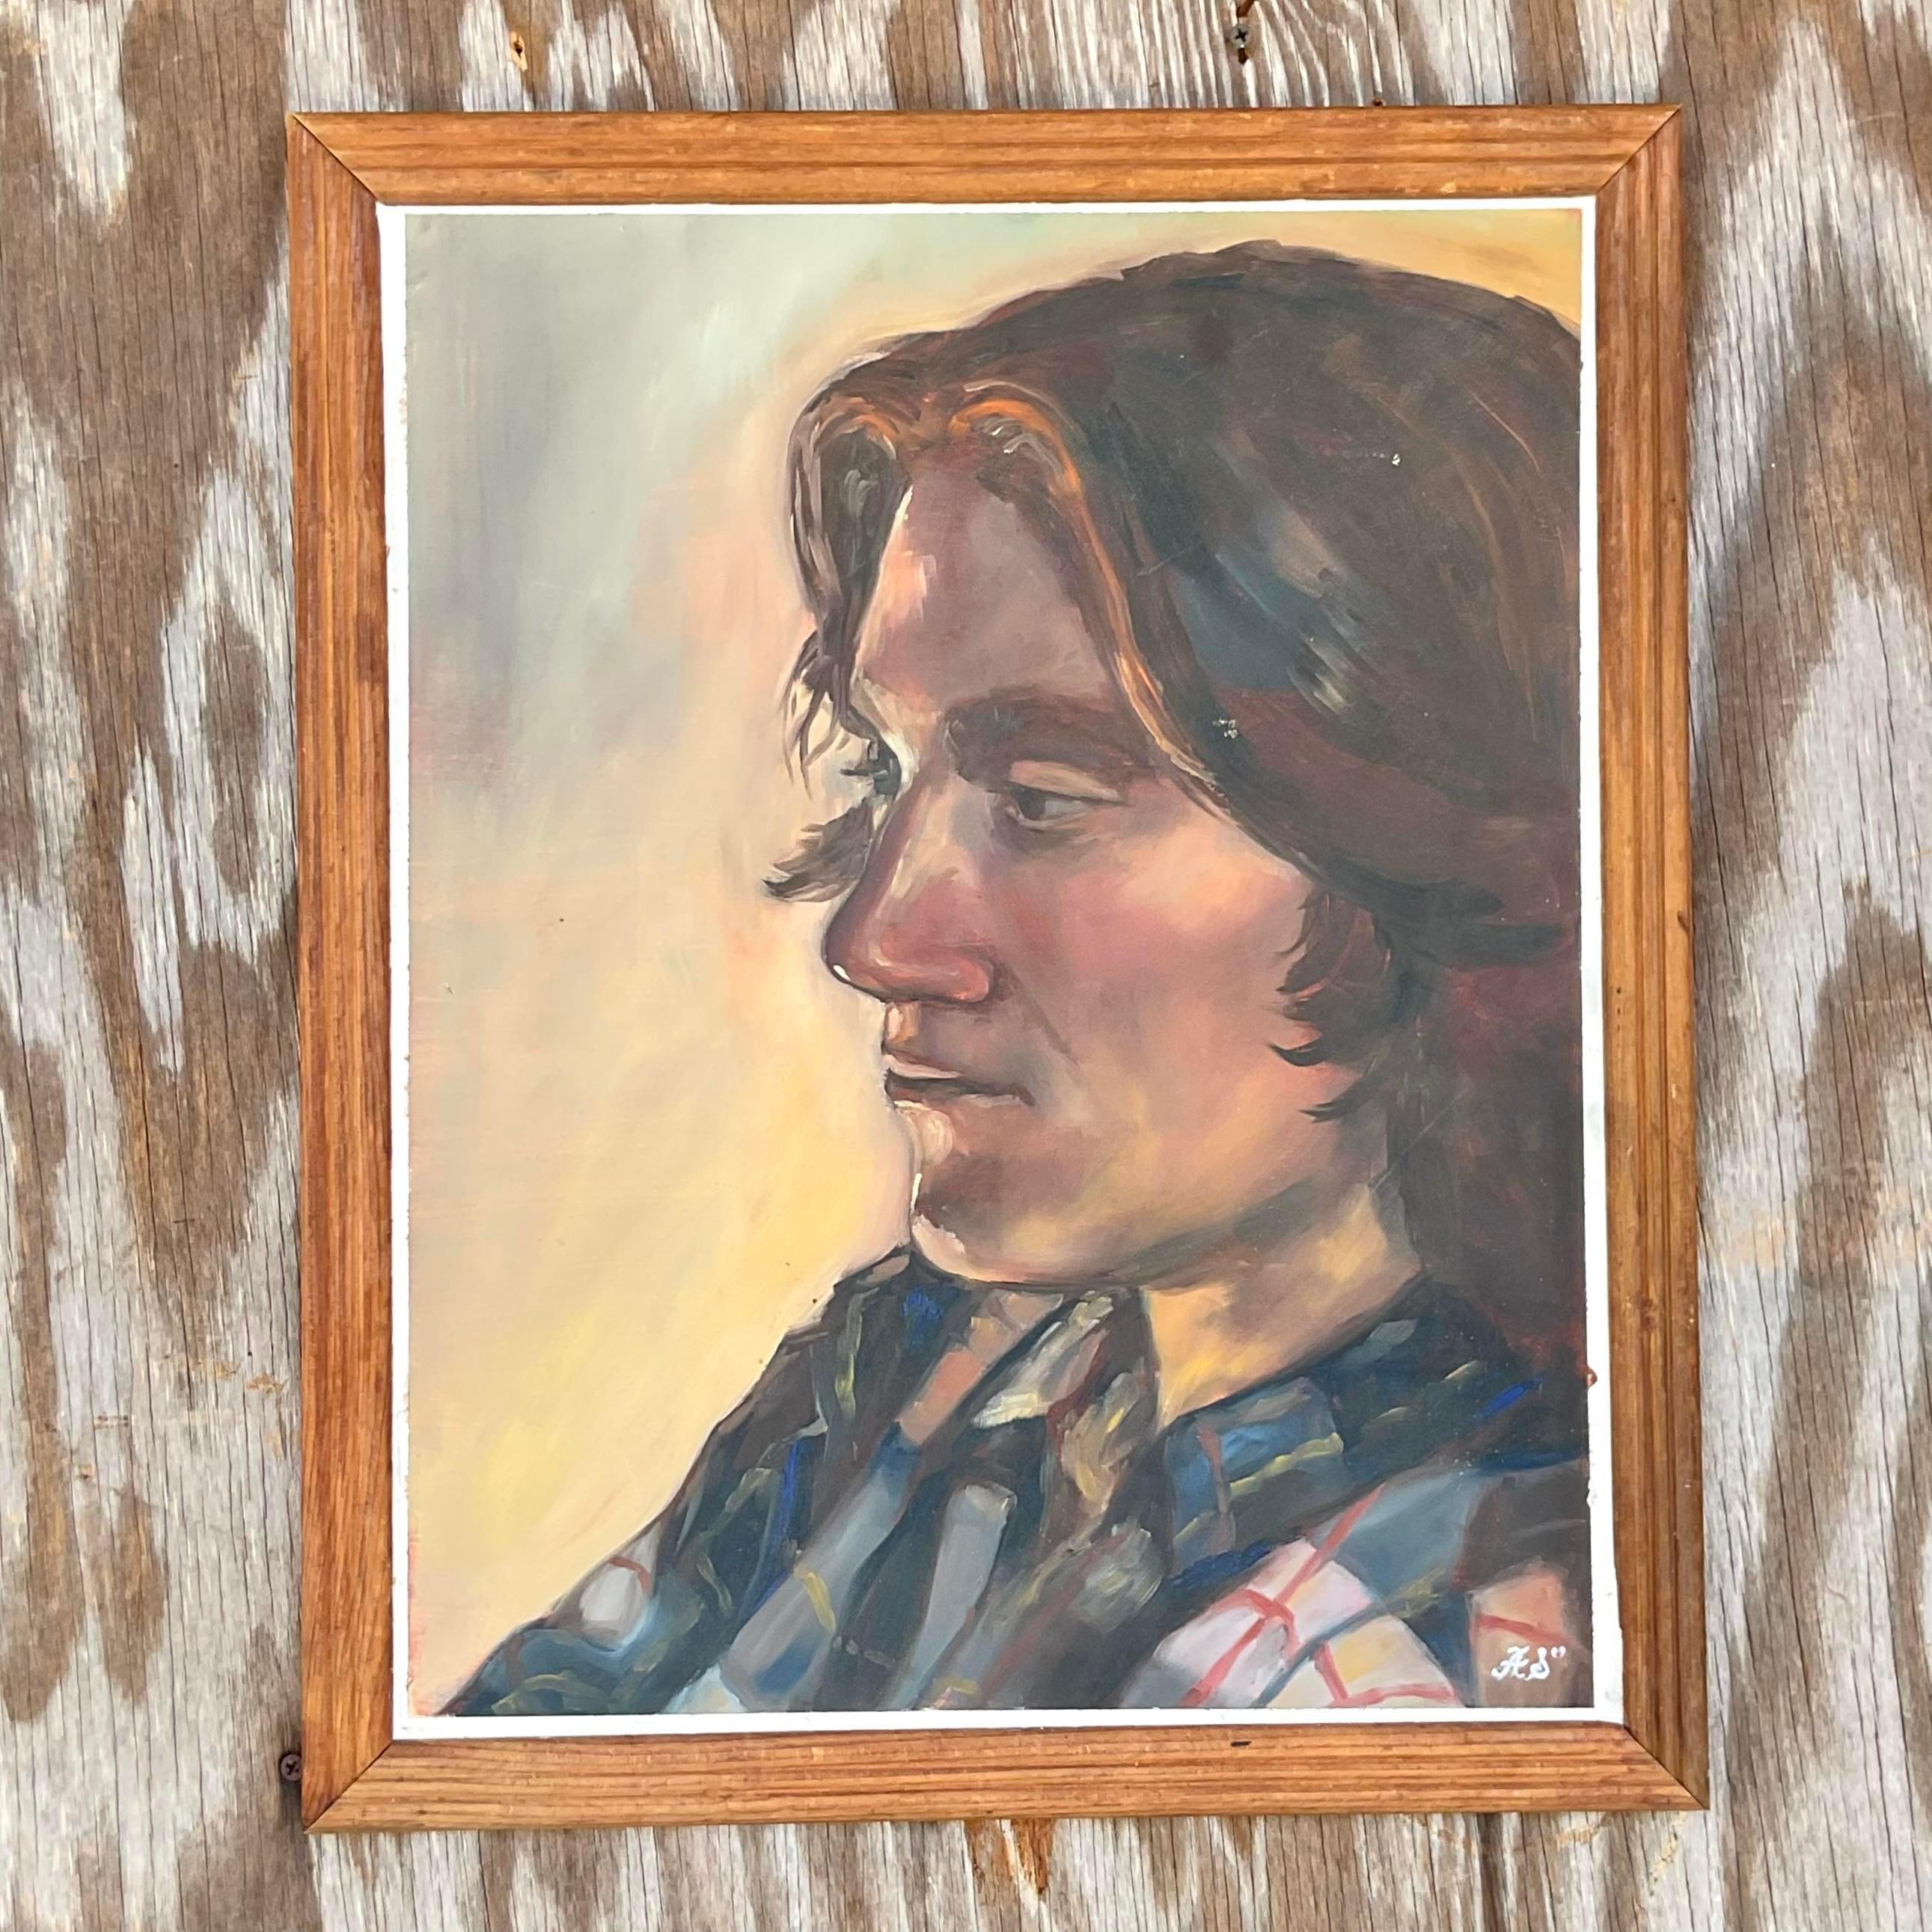 Fantastic vintage oil portrait of man. Beautiful painterly composition in rich, warm colors. Signed by the artist. Acquired from a Palm Beach estate. 